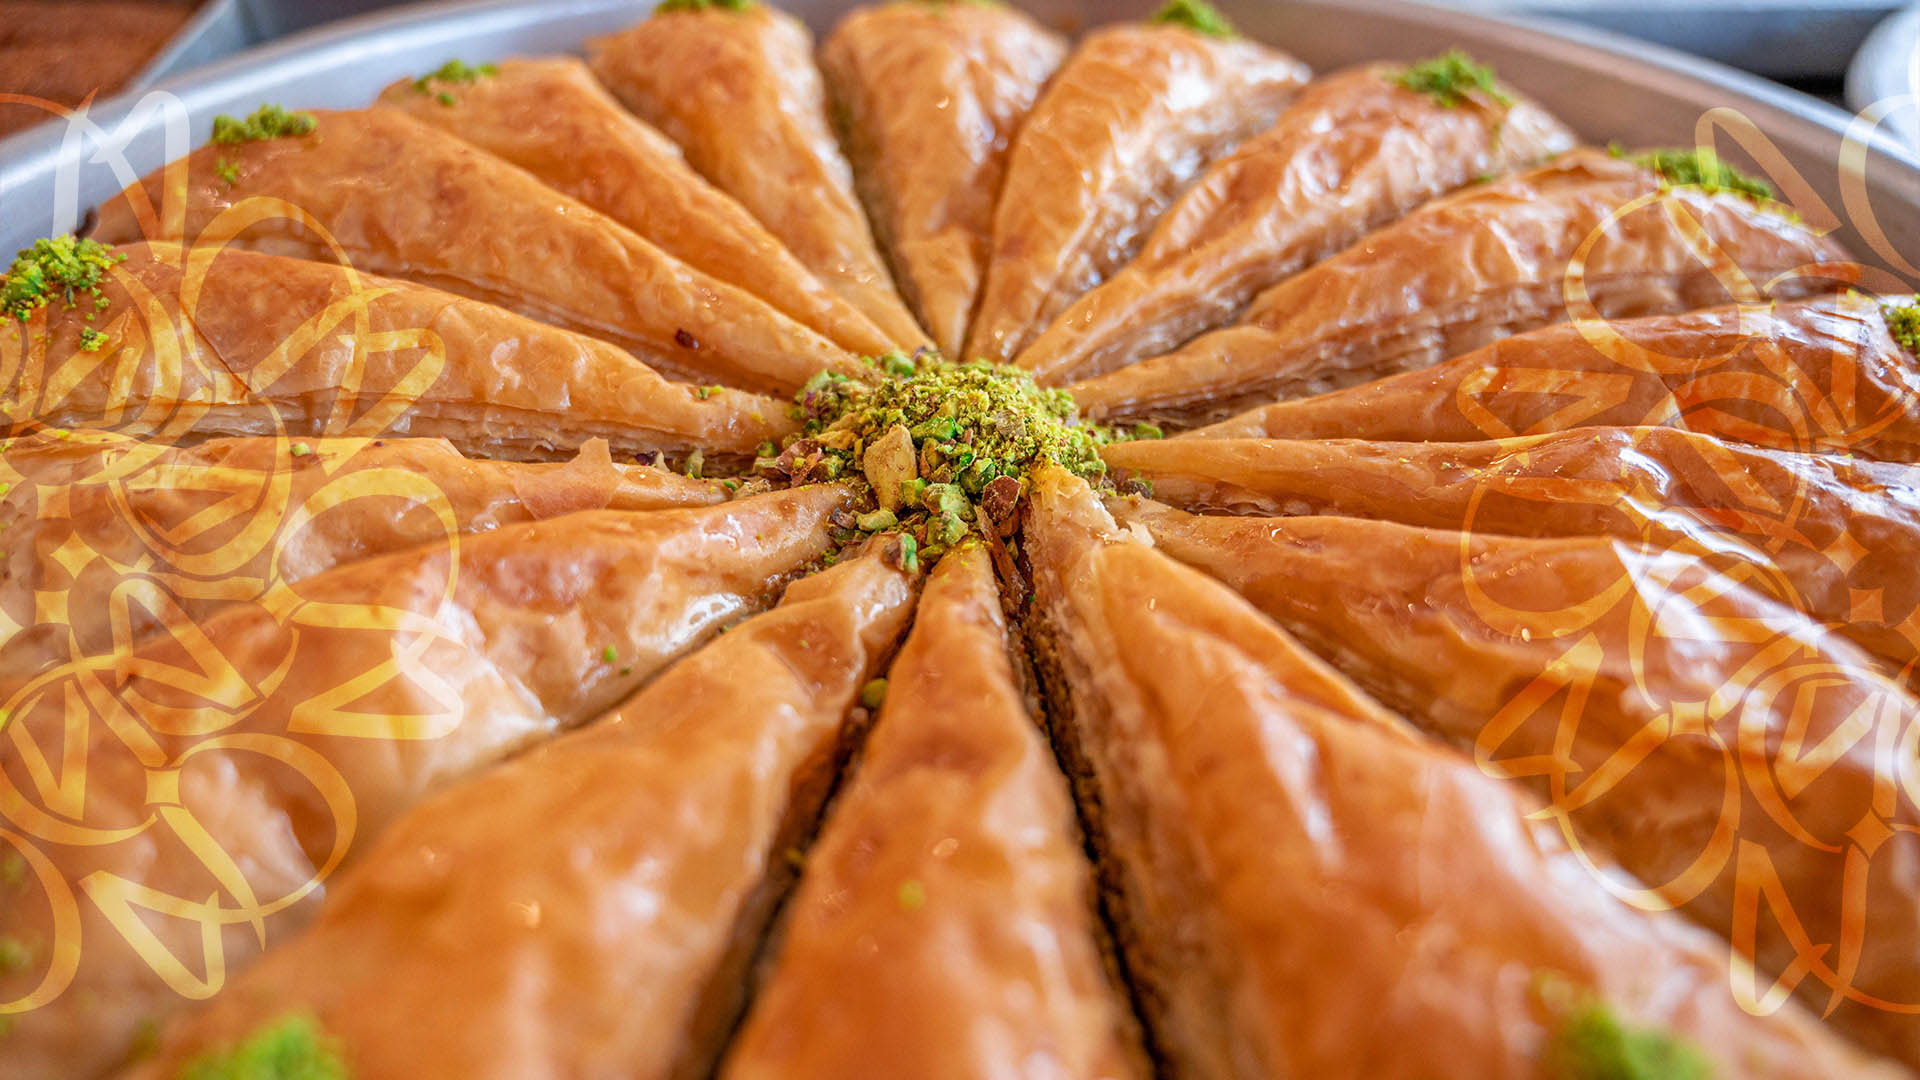 Explore The Best Turkish Sweets In Dubai - A Culinary Delight